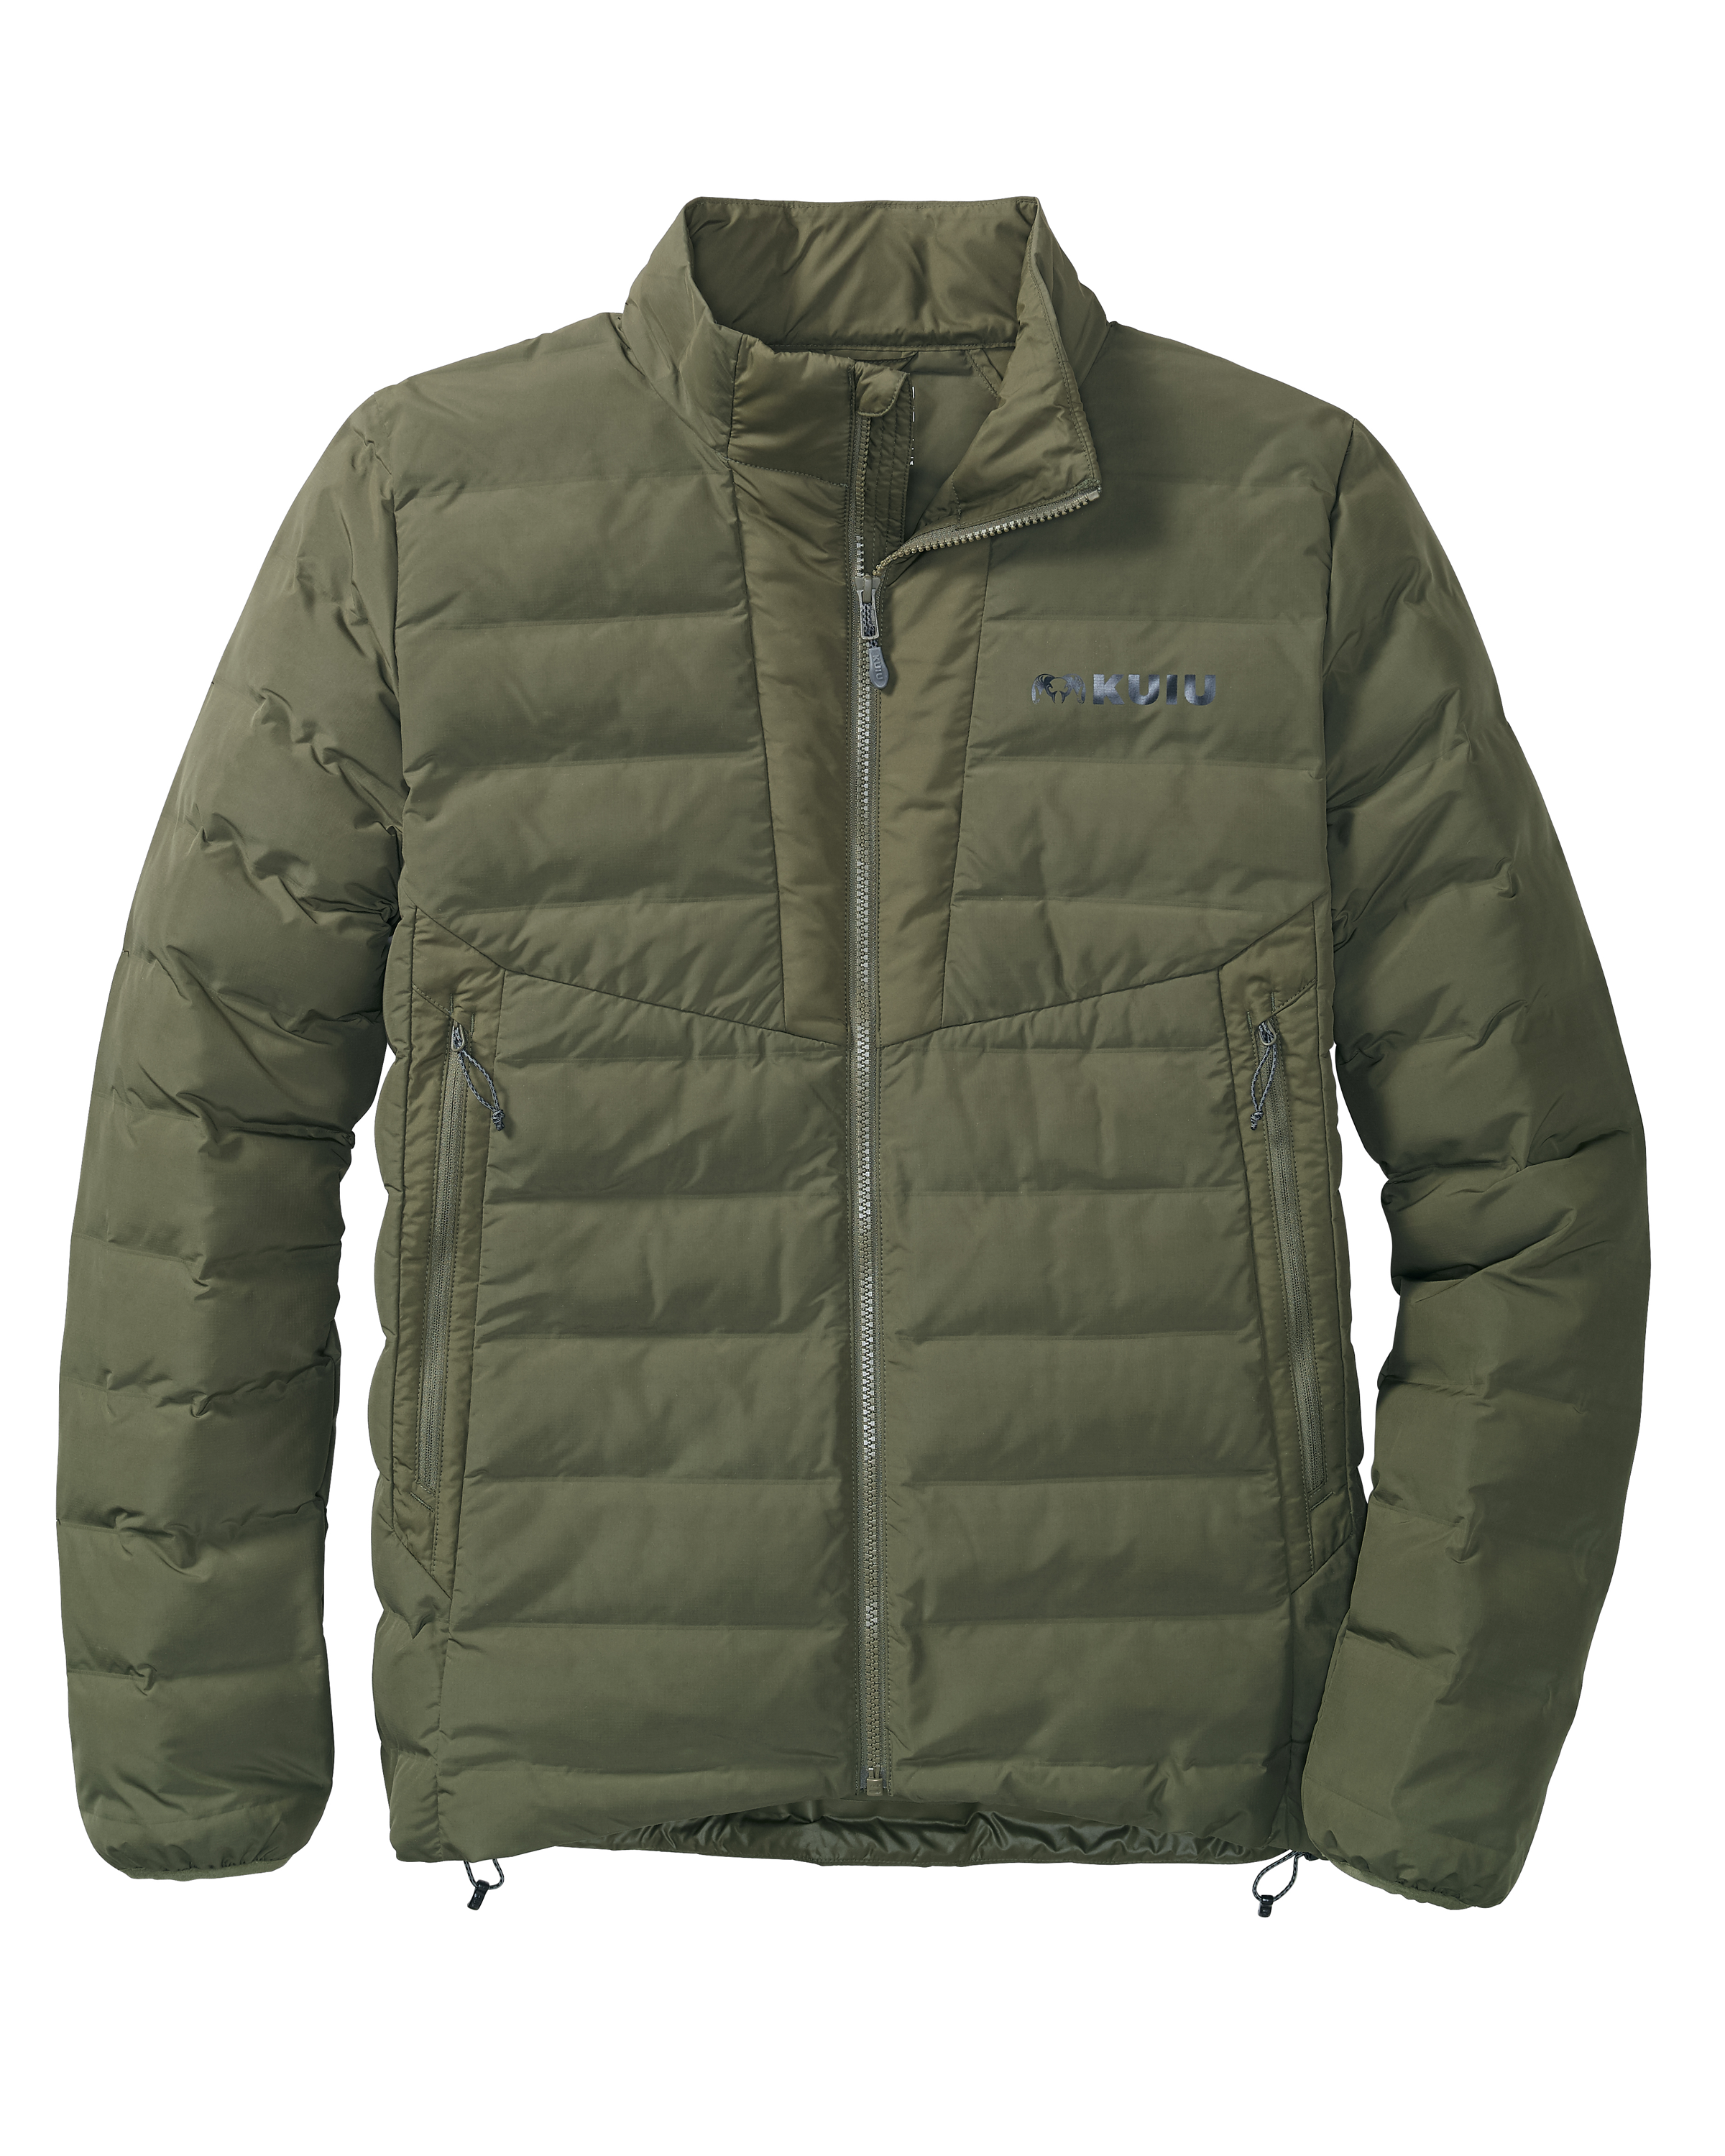 KUIU Elements Hunting Jacket in Olive | Size 2XL